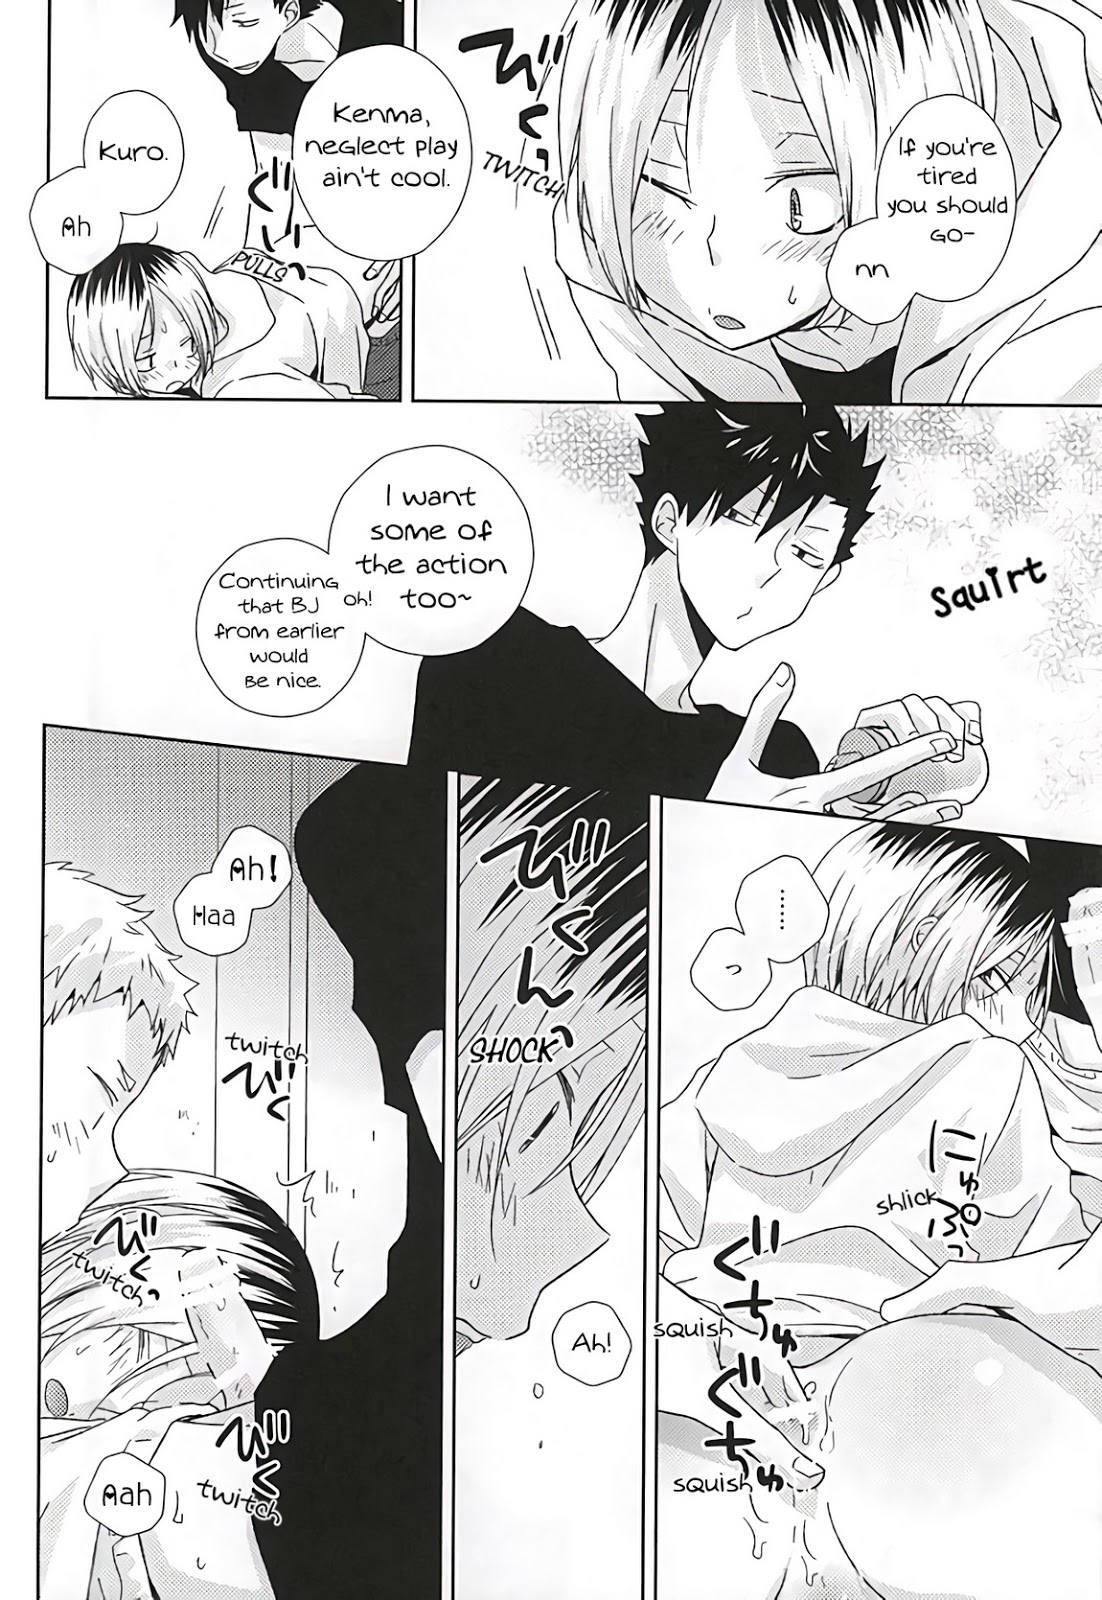 (SPARK10) [MOBRIS (Tomoharu)] HOWtoPLAY tutrial (Haikyuu!!) [English] [Homies over Hoes] page 13 full